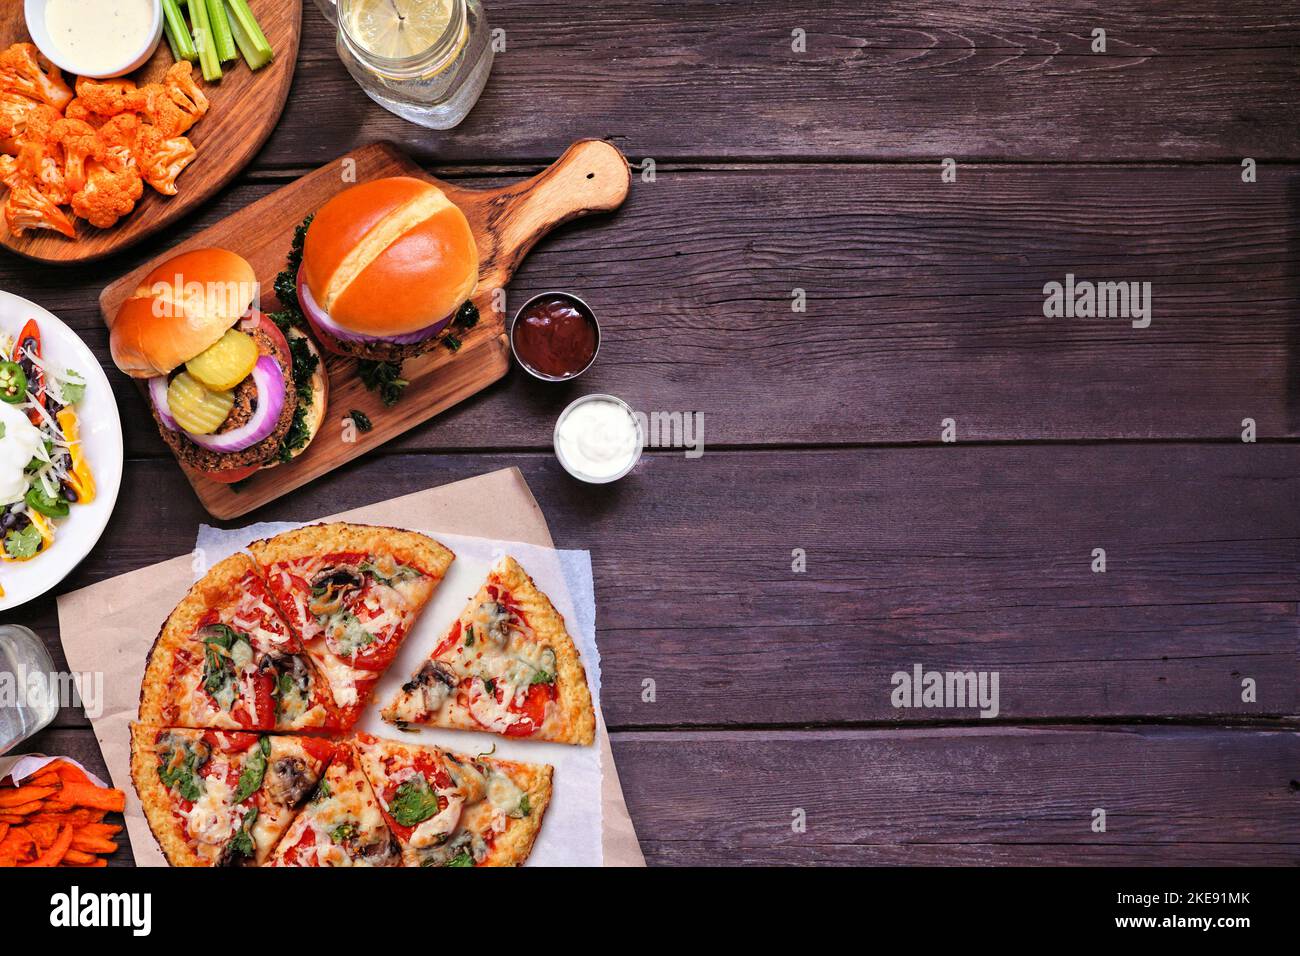 Healthy plant based fast food side border. Above view over a dark wood background. Table scene with cauliflower crust pizza, bean burgers and vegetari Stock Photo